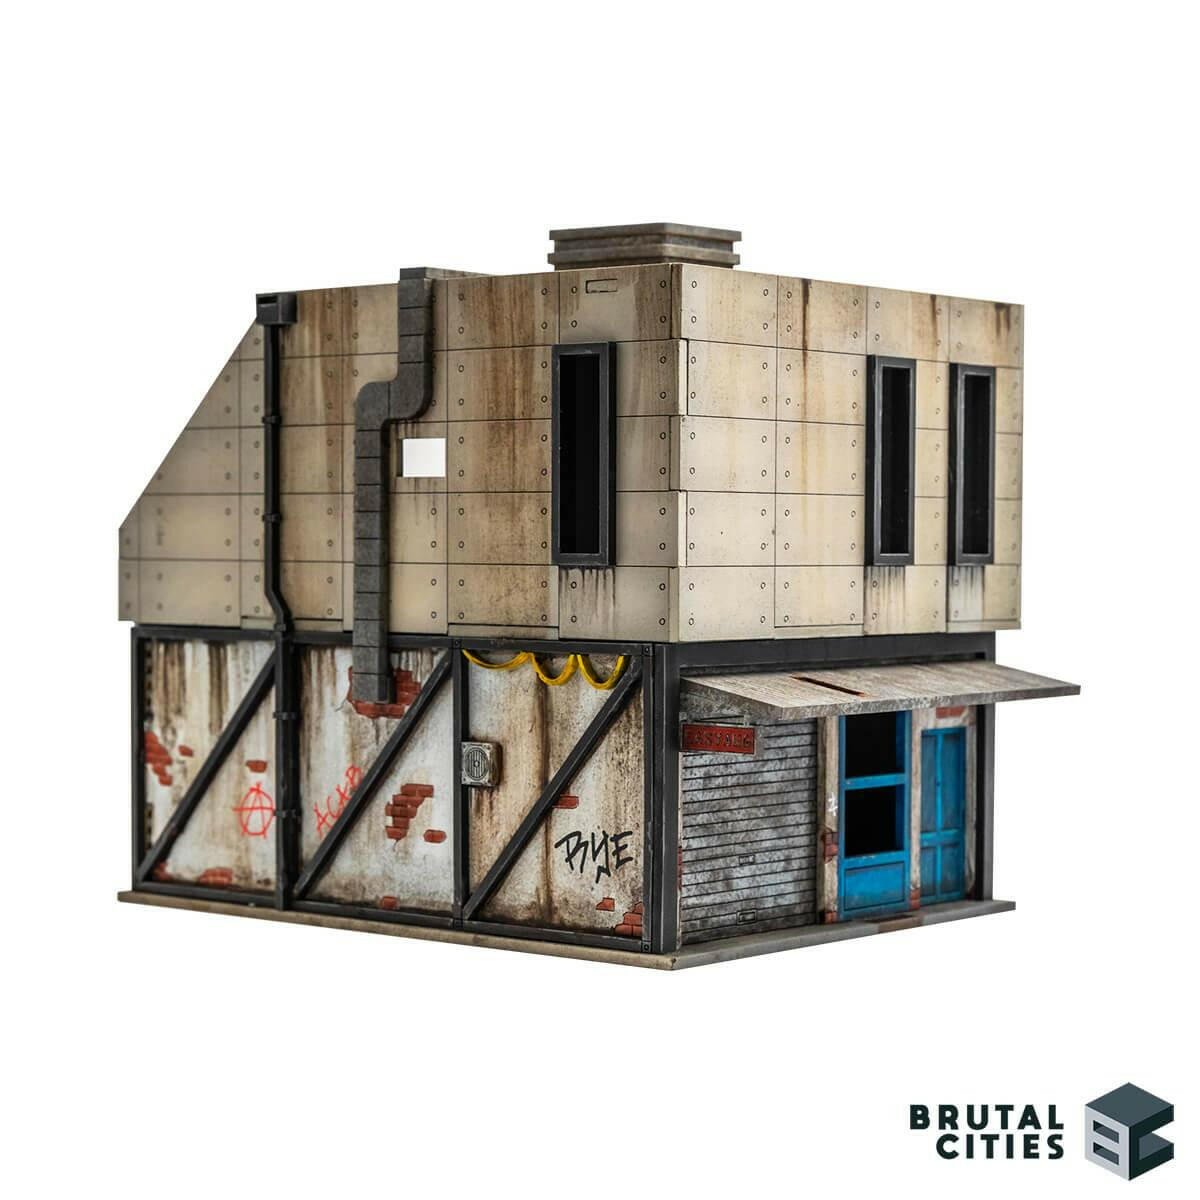 28mm terrain showing a Brutalist renovation on top of a delapidated brick shop